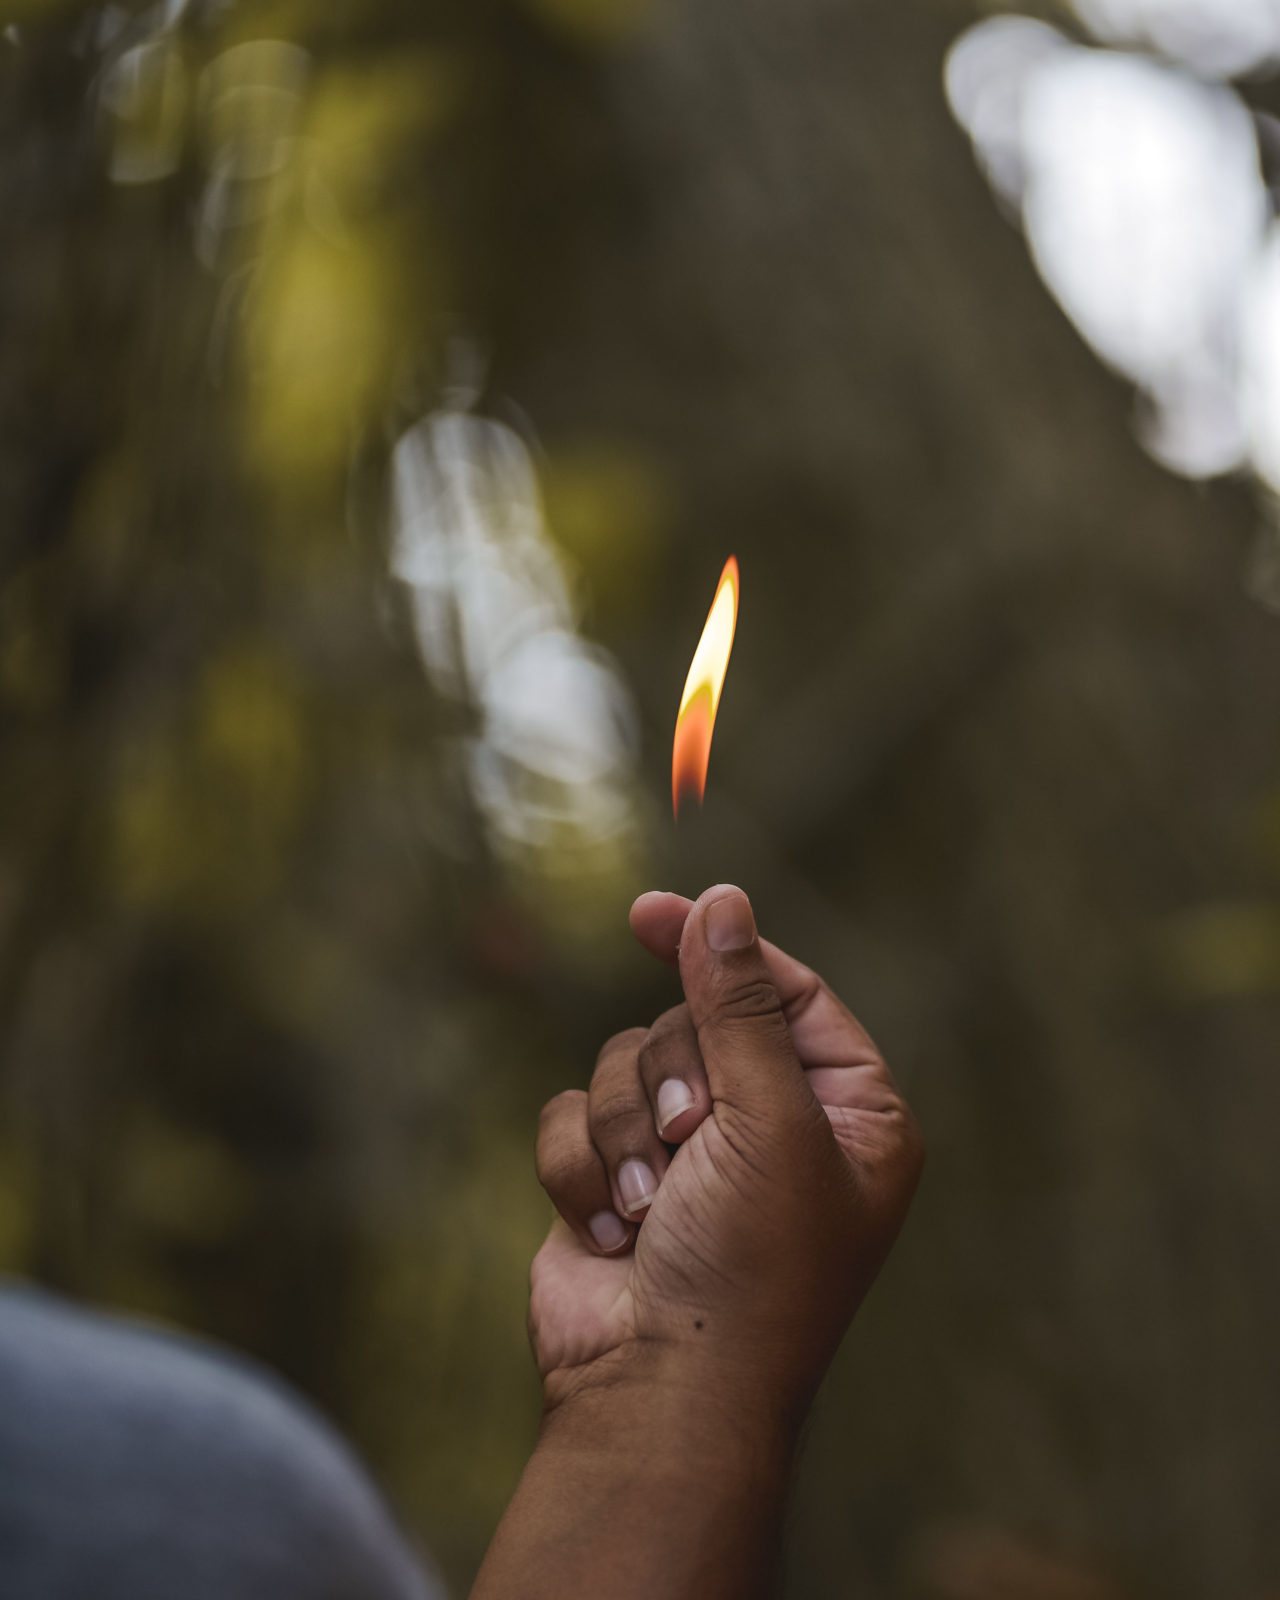 A person holding a lit match in their hand.